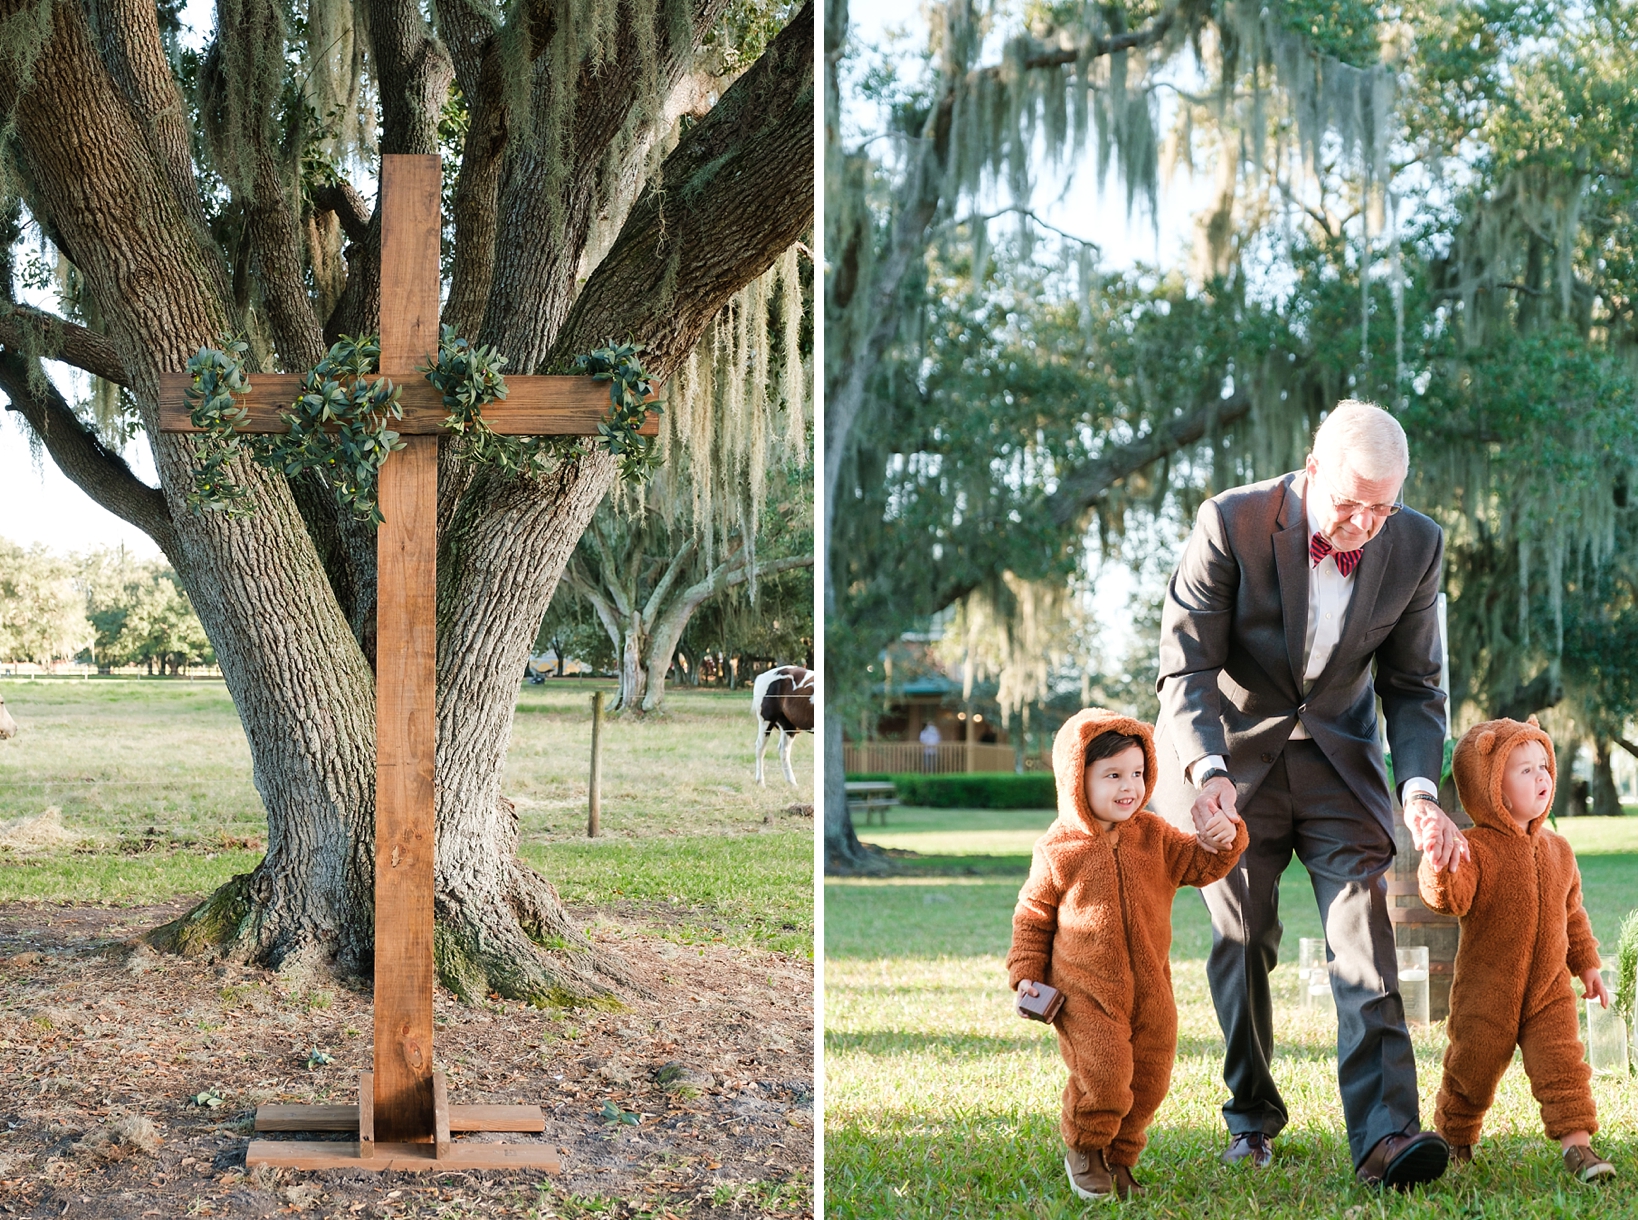 A large wooden cross handmade by the groom and two boys dressed as ring "Bear"-ers